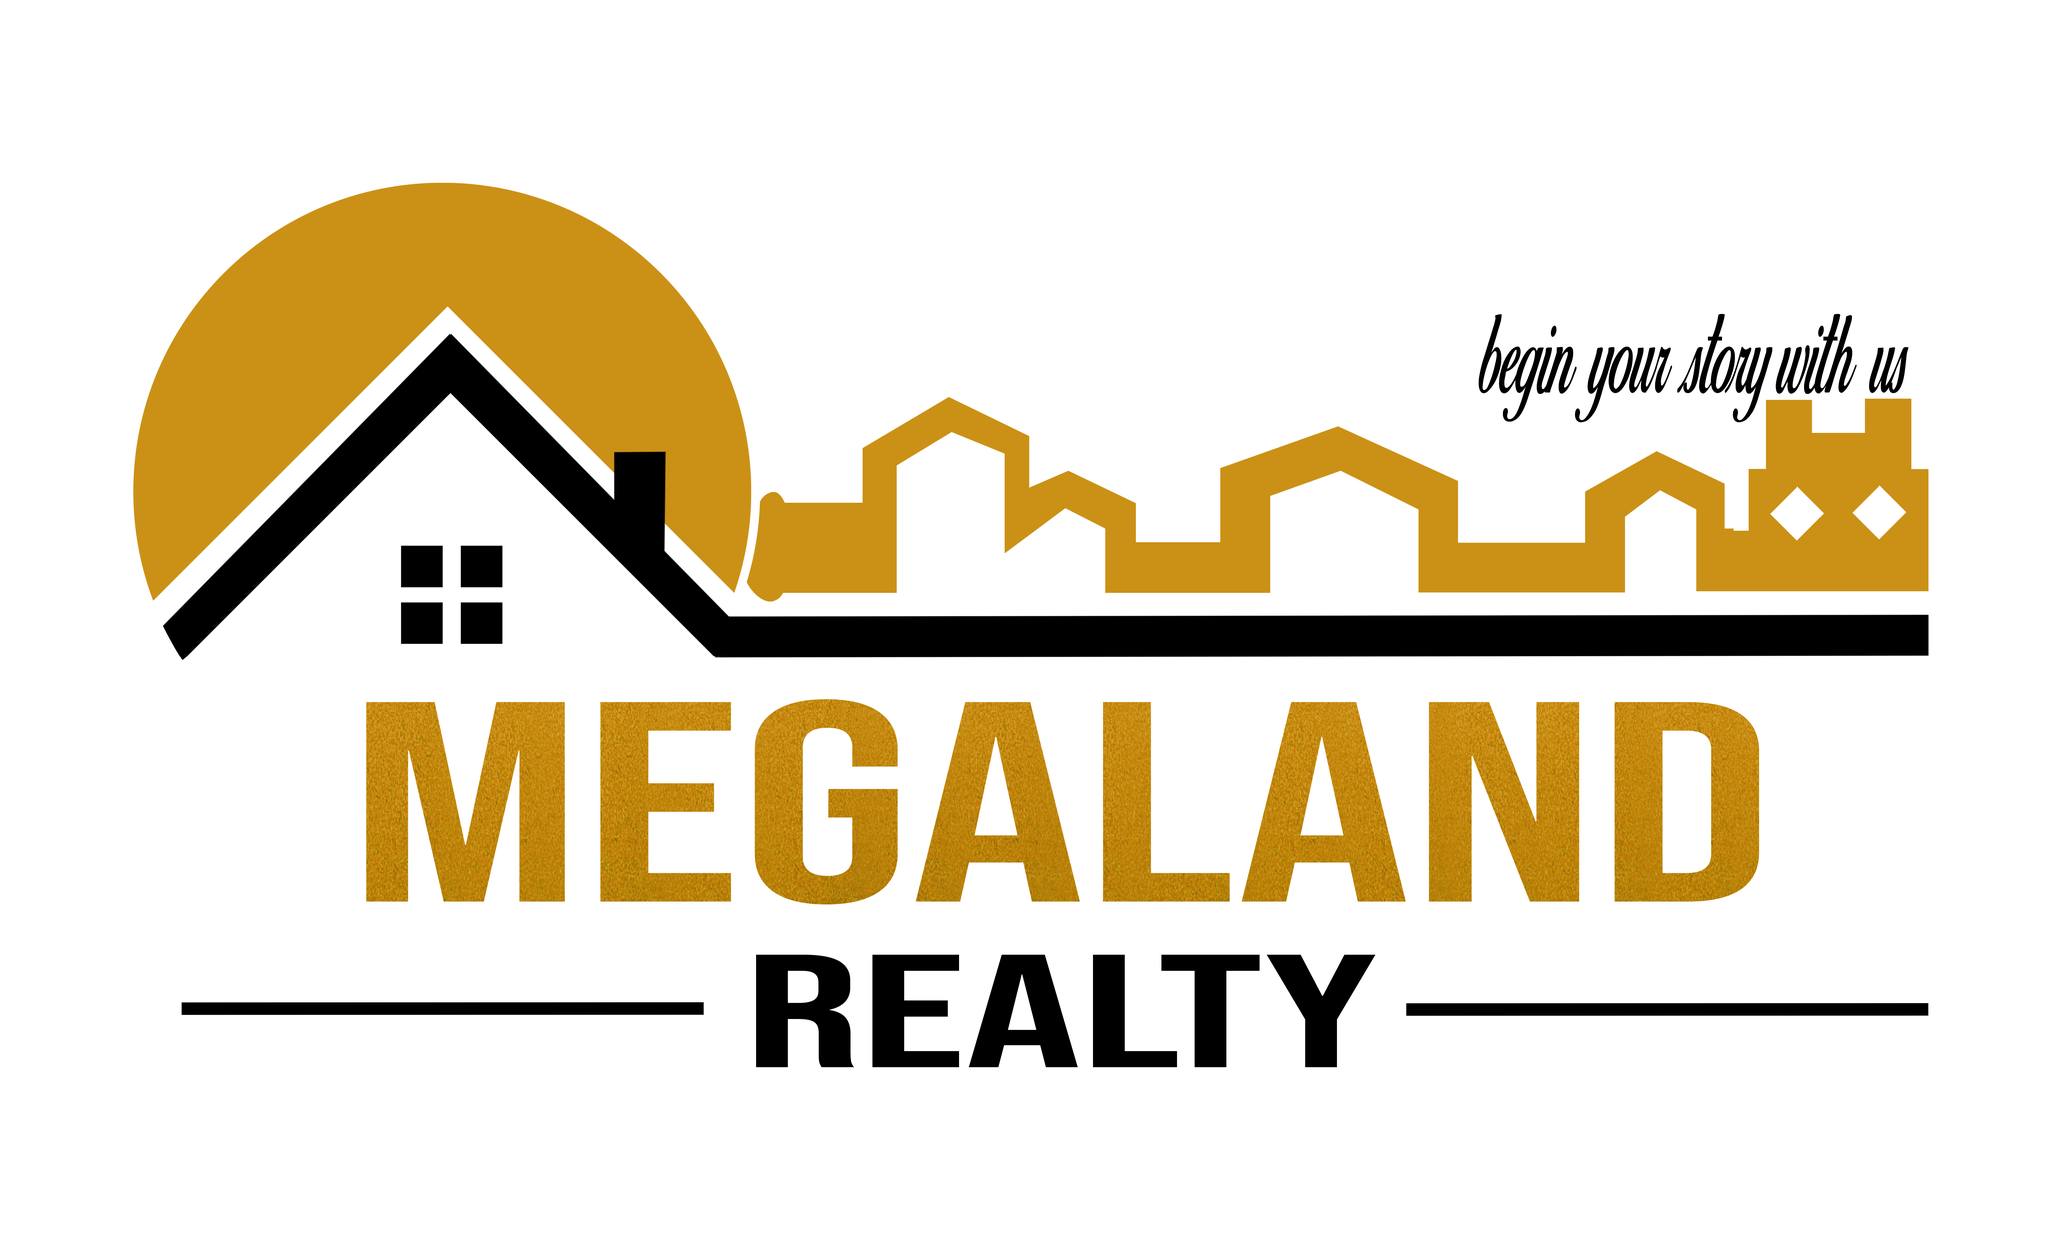 Megaland Realty